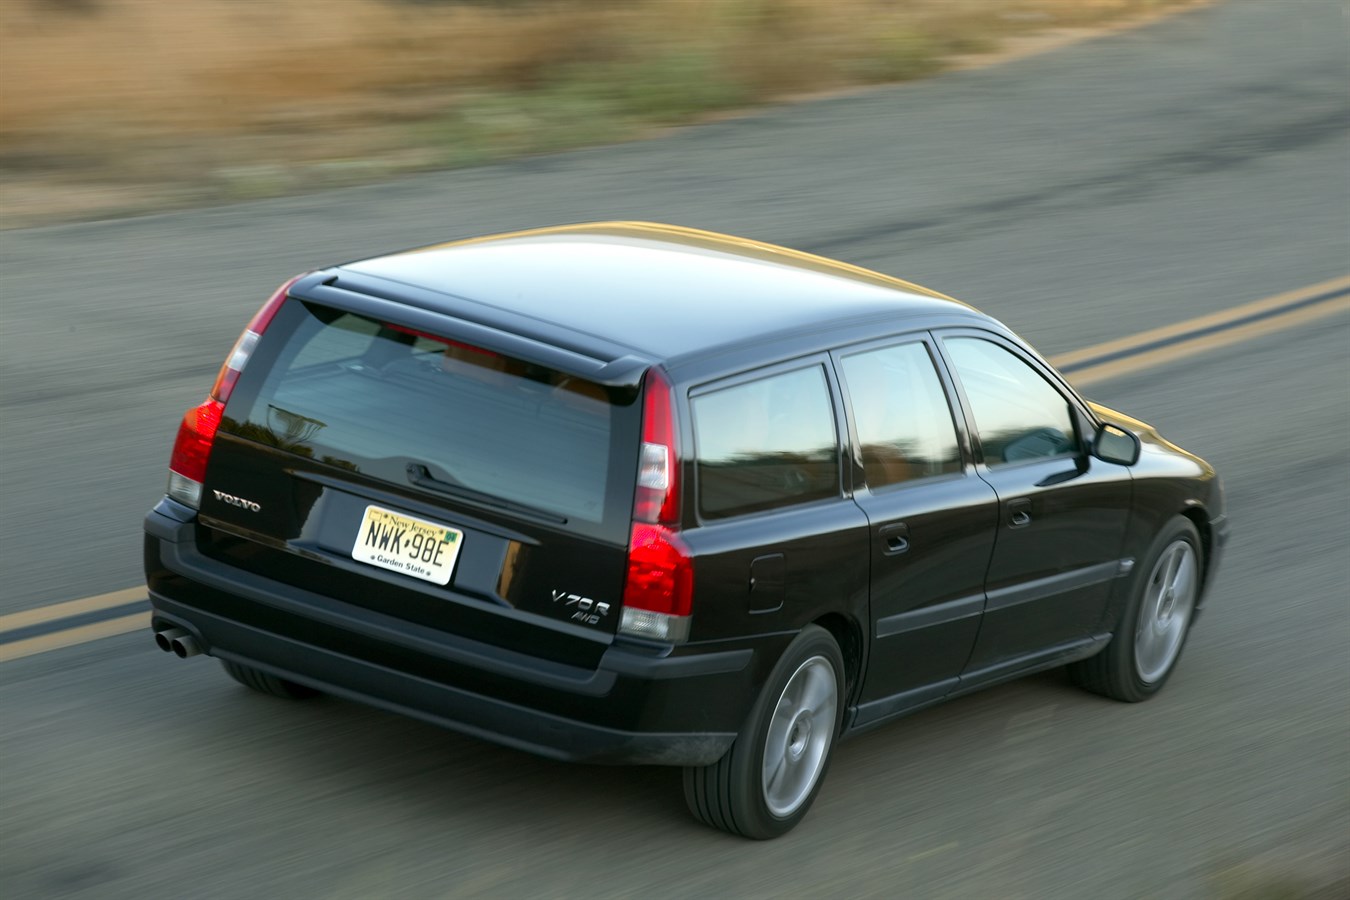 Volvo V70 R On The Road